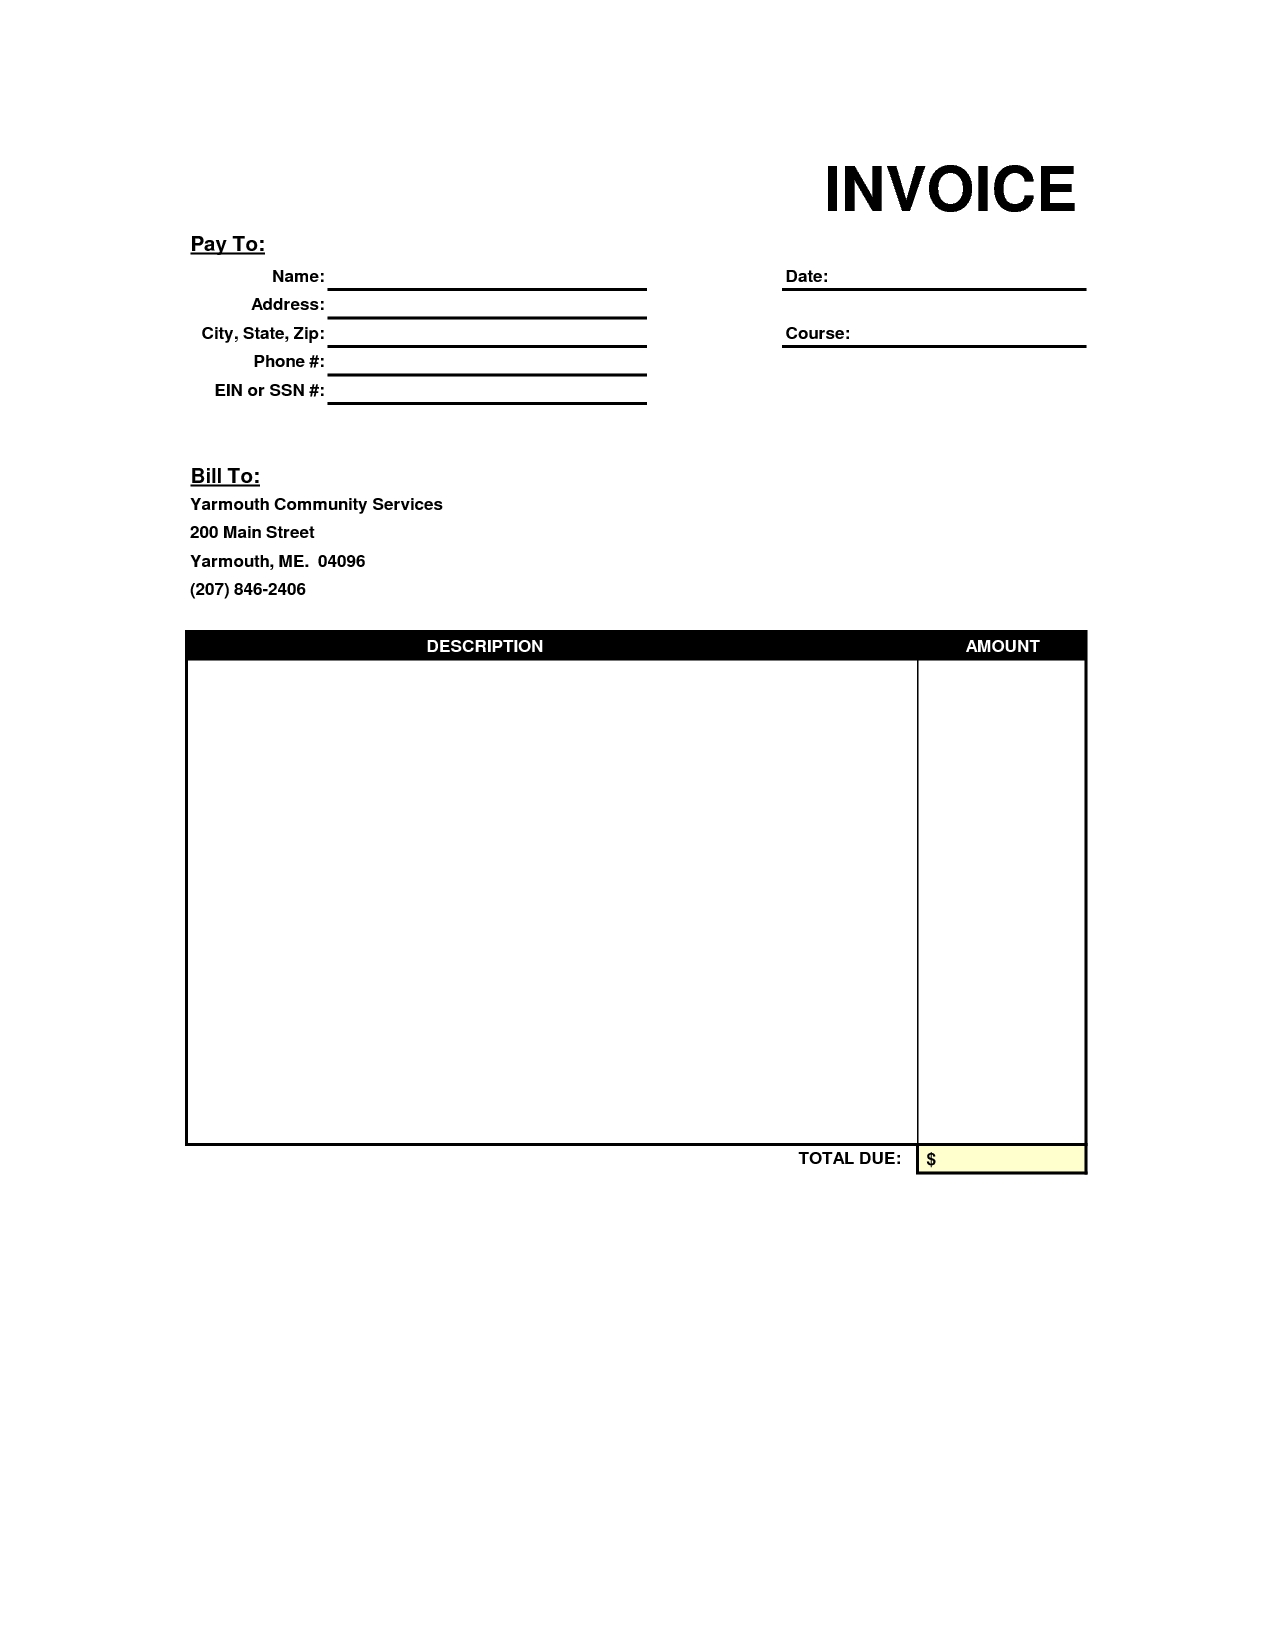 blank invoice template blank invoice invoice sheet template